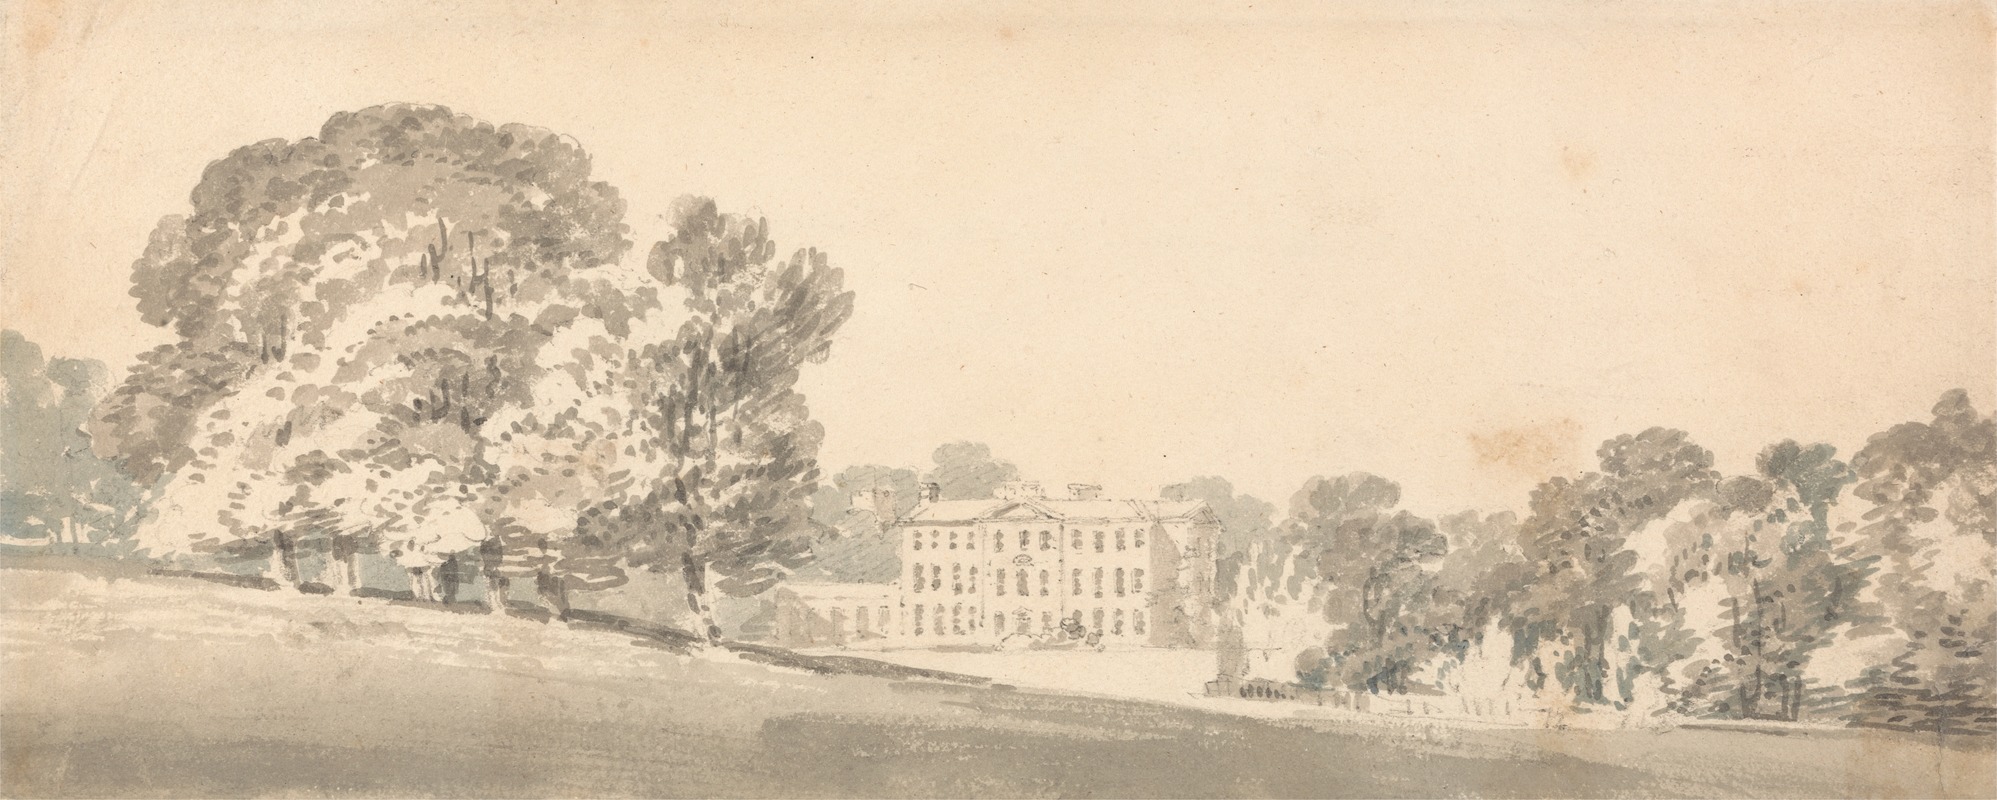 Joseph Mallord William Turner - A Three Storied Georgian House in a Park